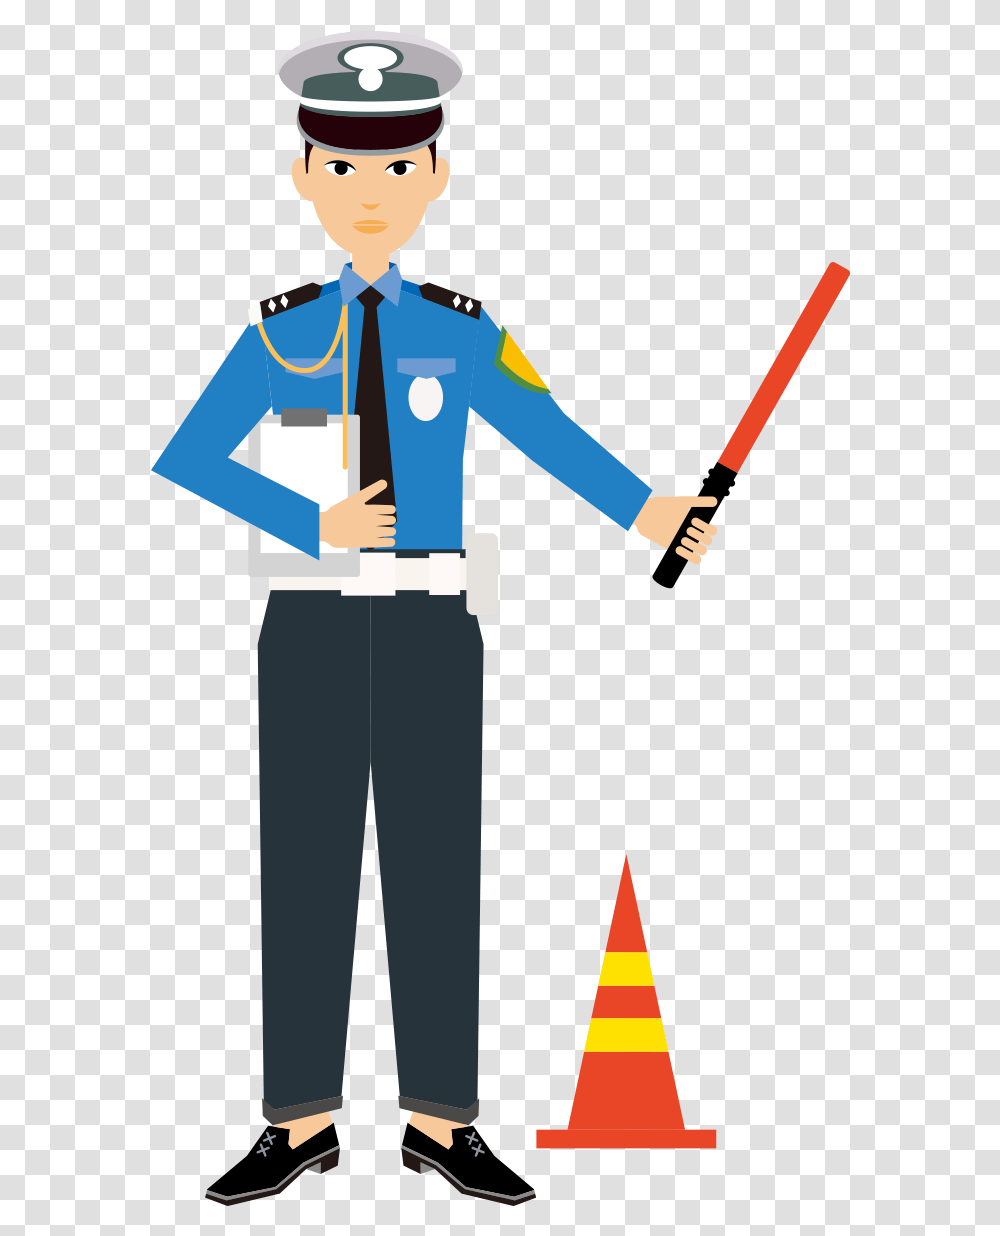 Police Clipart Traffic Police Traffic Police Cartoon, Military Uniform, Officer, Cross Transparent Png